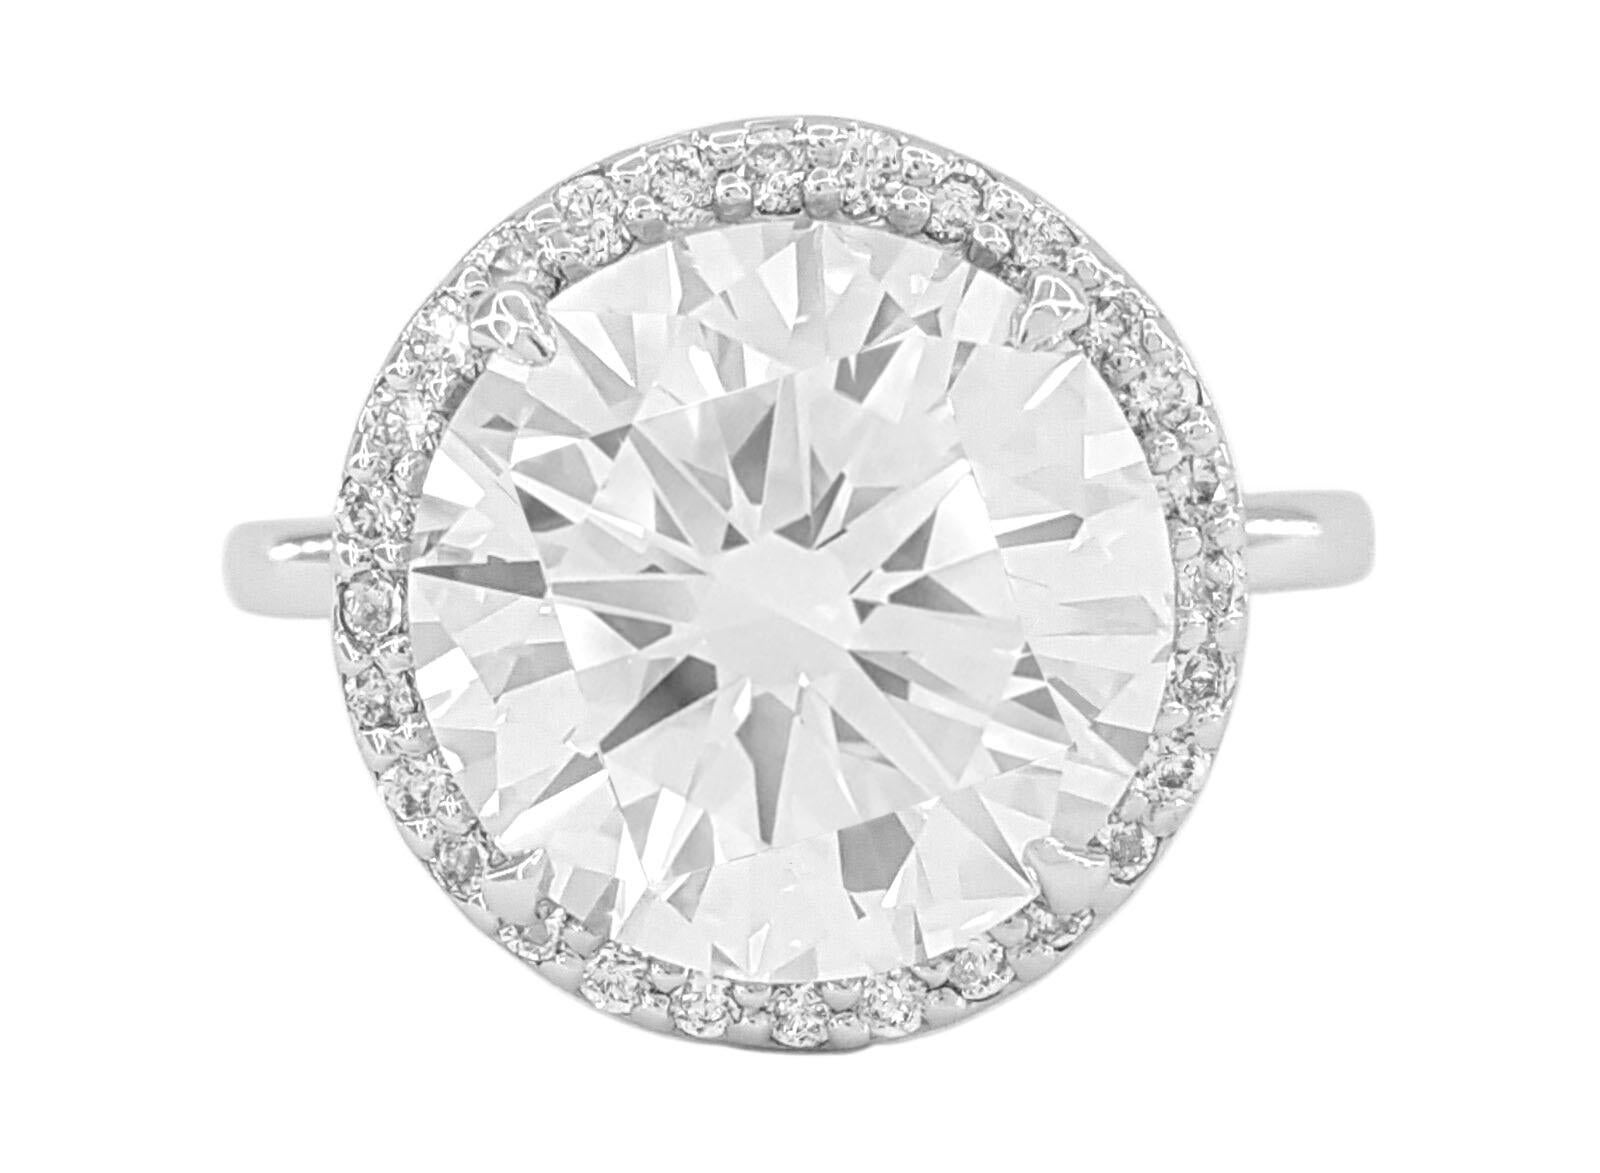 This magnificent 7 carat F color VS clarity round brilliant cut diamond ring set in 18K white gold features an exquisite halo setting, radiating timeless elegance and sophistication. 
At the heart of this exceptional ring dazzles a breathtaking 7